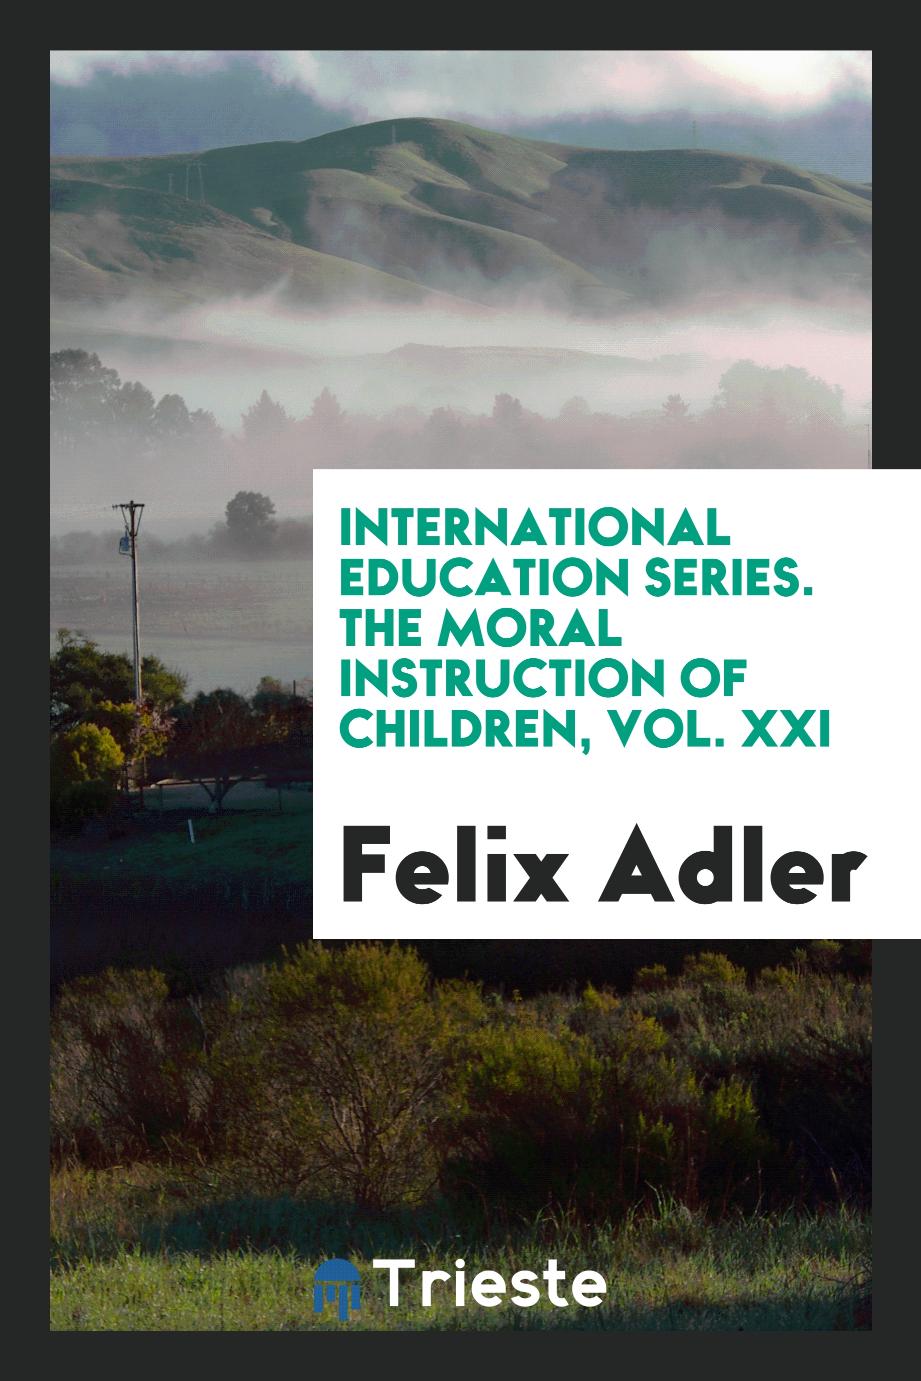 International education series. The moral instruction of children, Vol. XXI